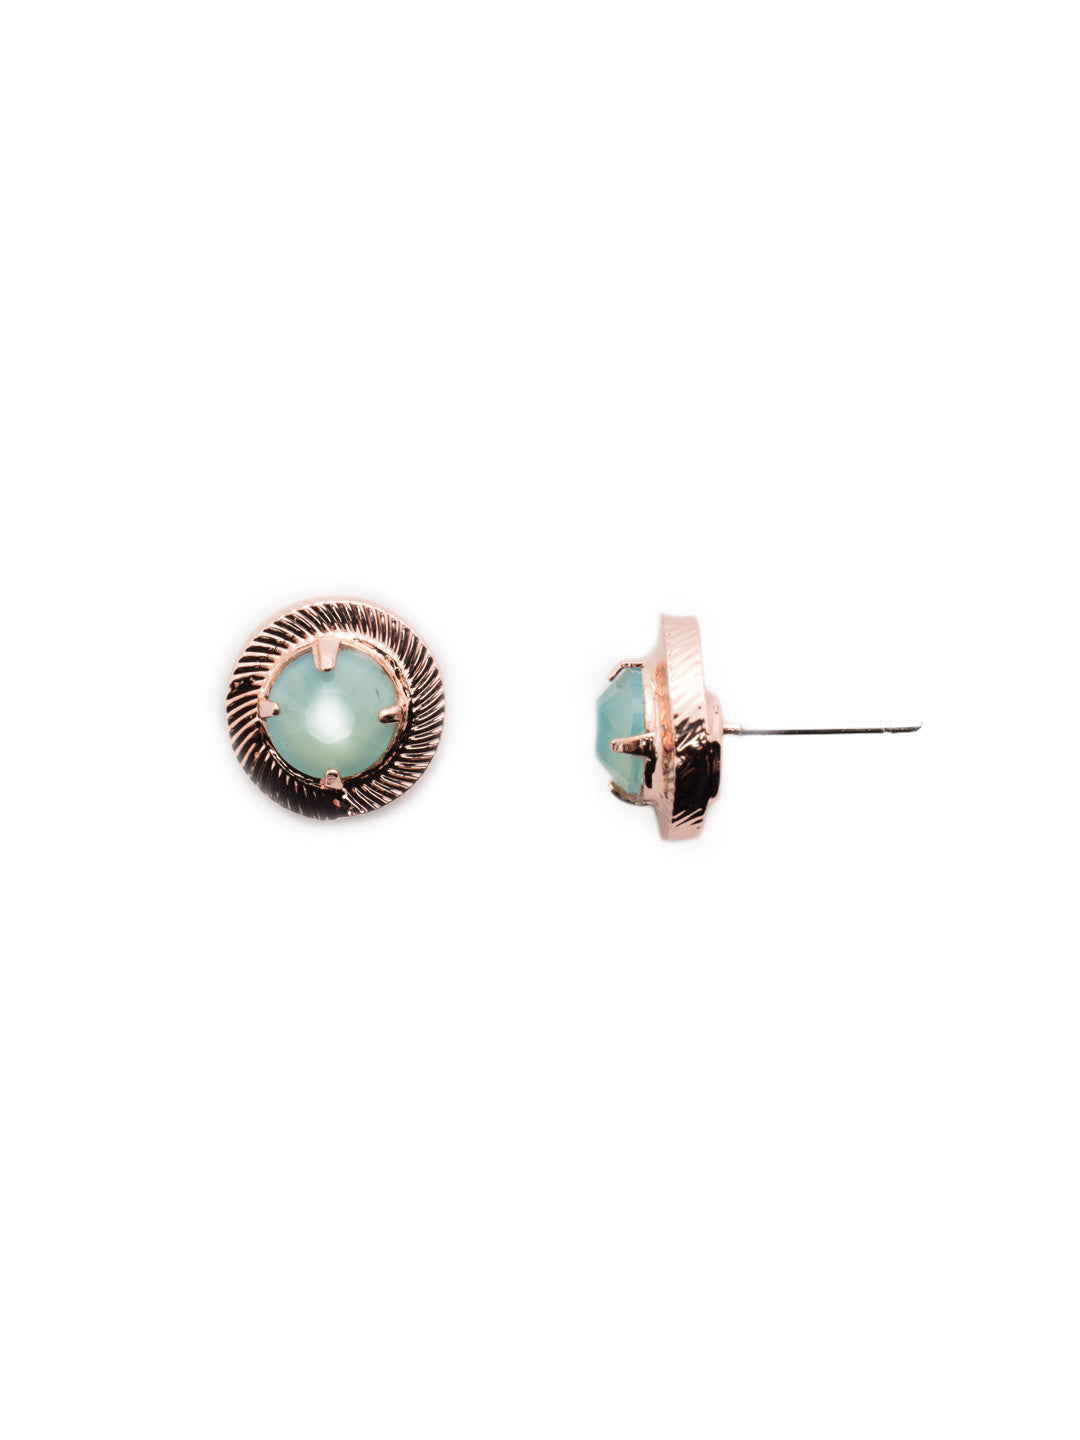 Kaylani Stud Earrings - EEU205RGPAC - Simple, yet classic. The Kaylani Stud is a jewlry box must designed with a beautiful round crystal. From Sorrelli's Pacific Opal collection in our Rose Gold-tone finish.